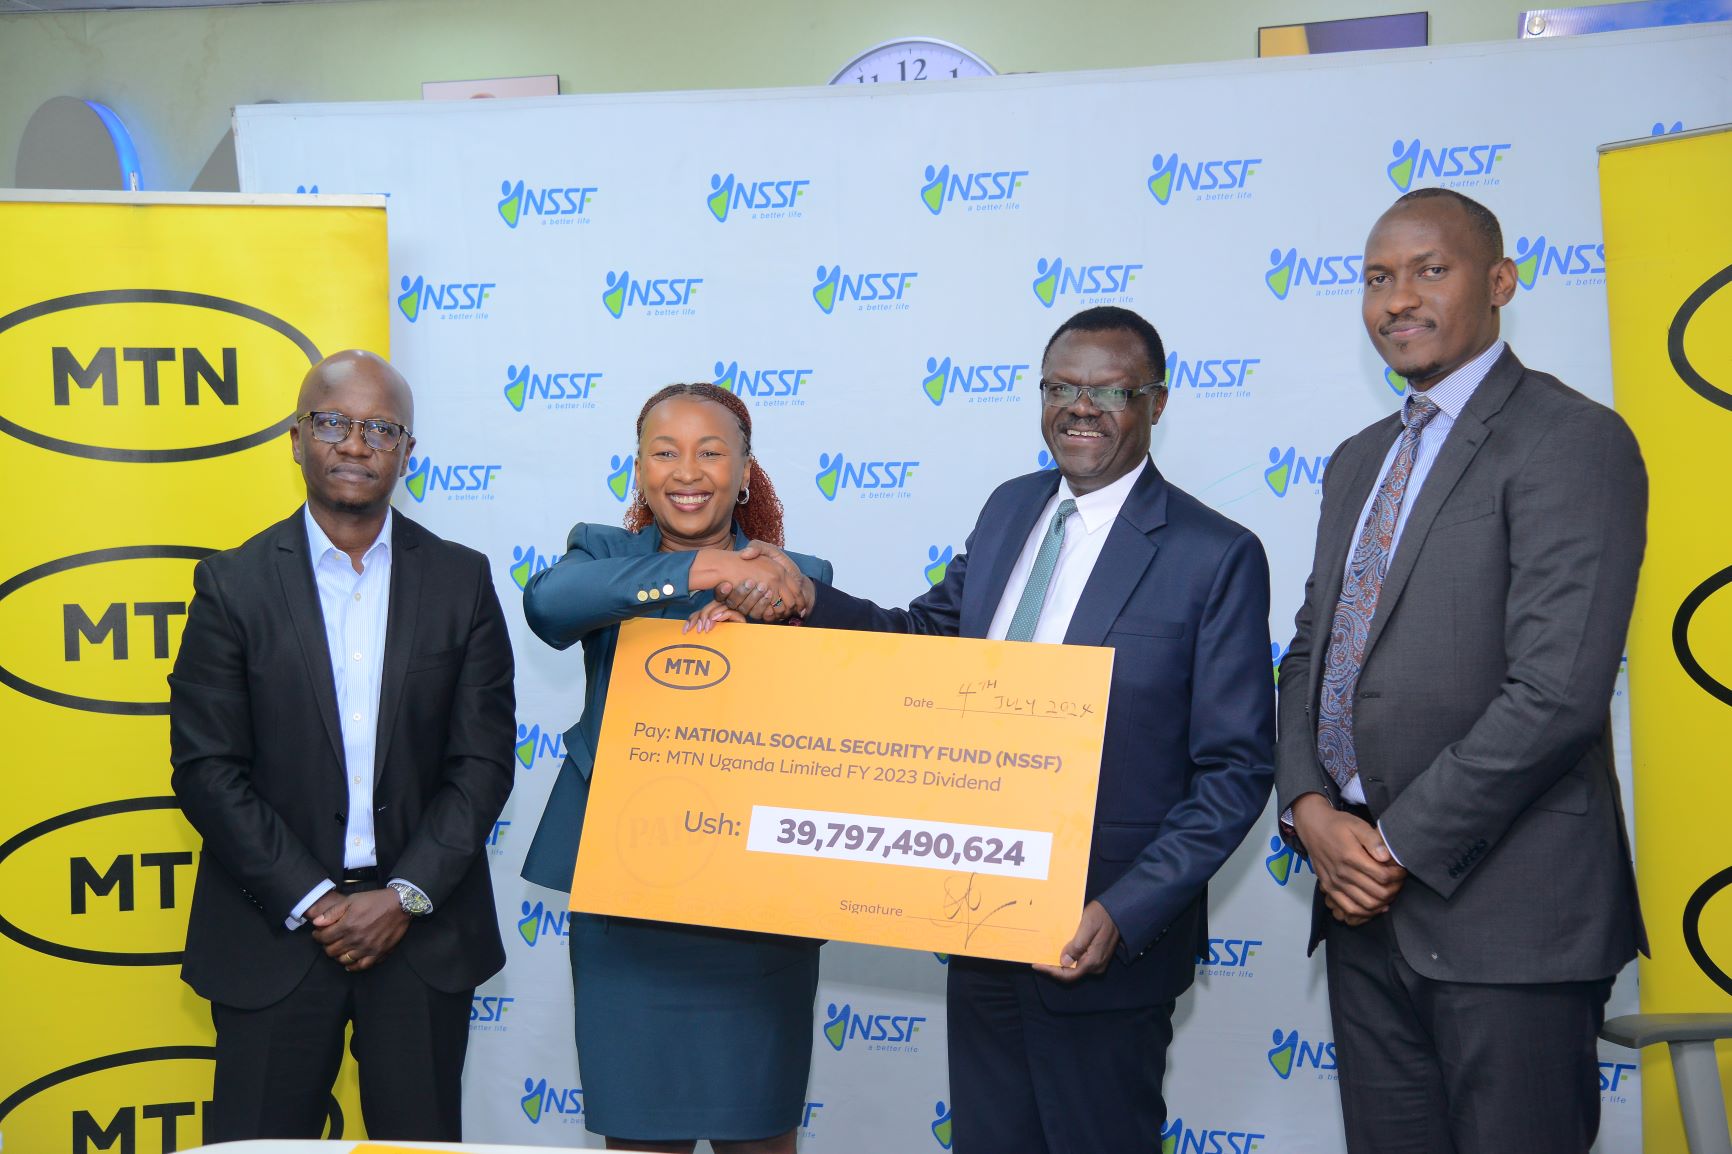 NSSF earns shs80.6bn in dividends in three years from MTN